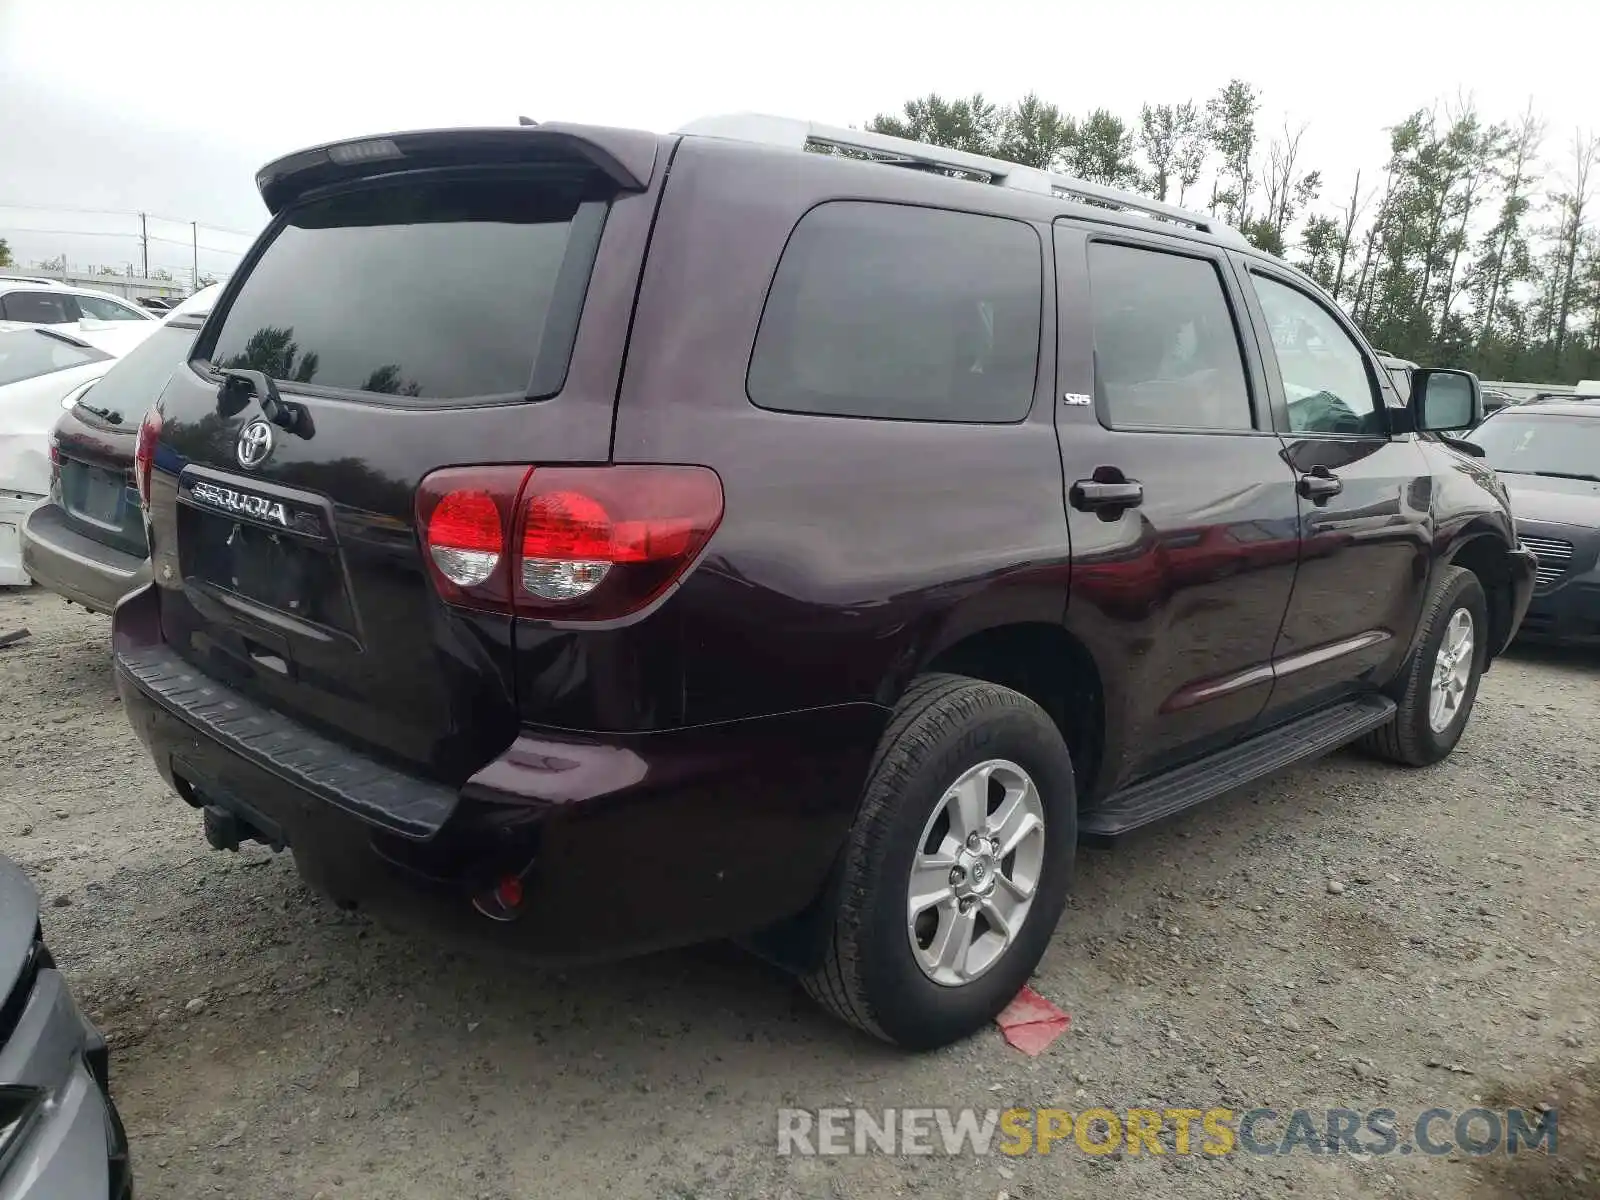 4 Photograph of a damaged car 5TDBY5G10KS173126 TOYOTA SEQUOIA 2019